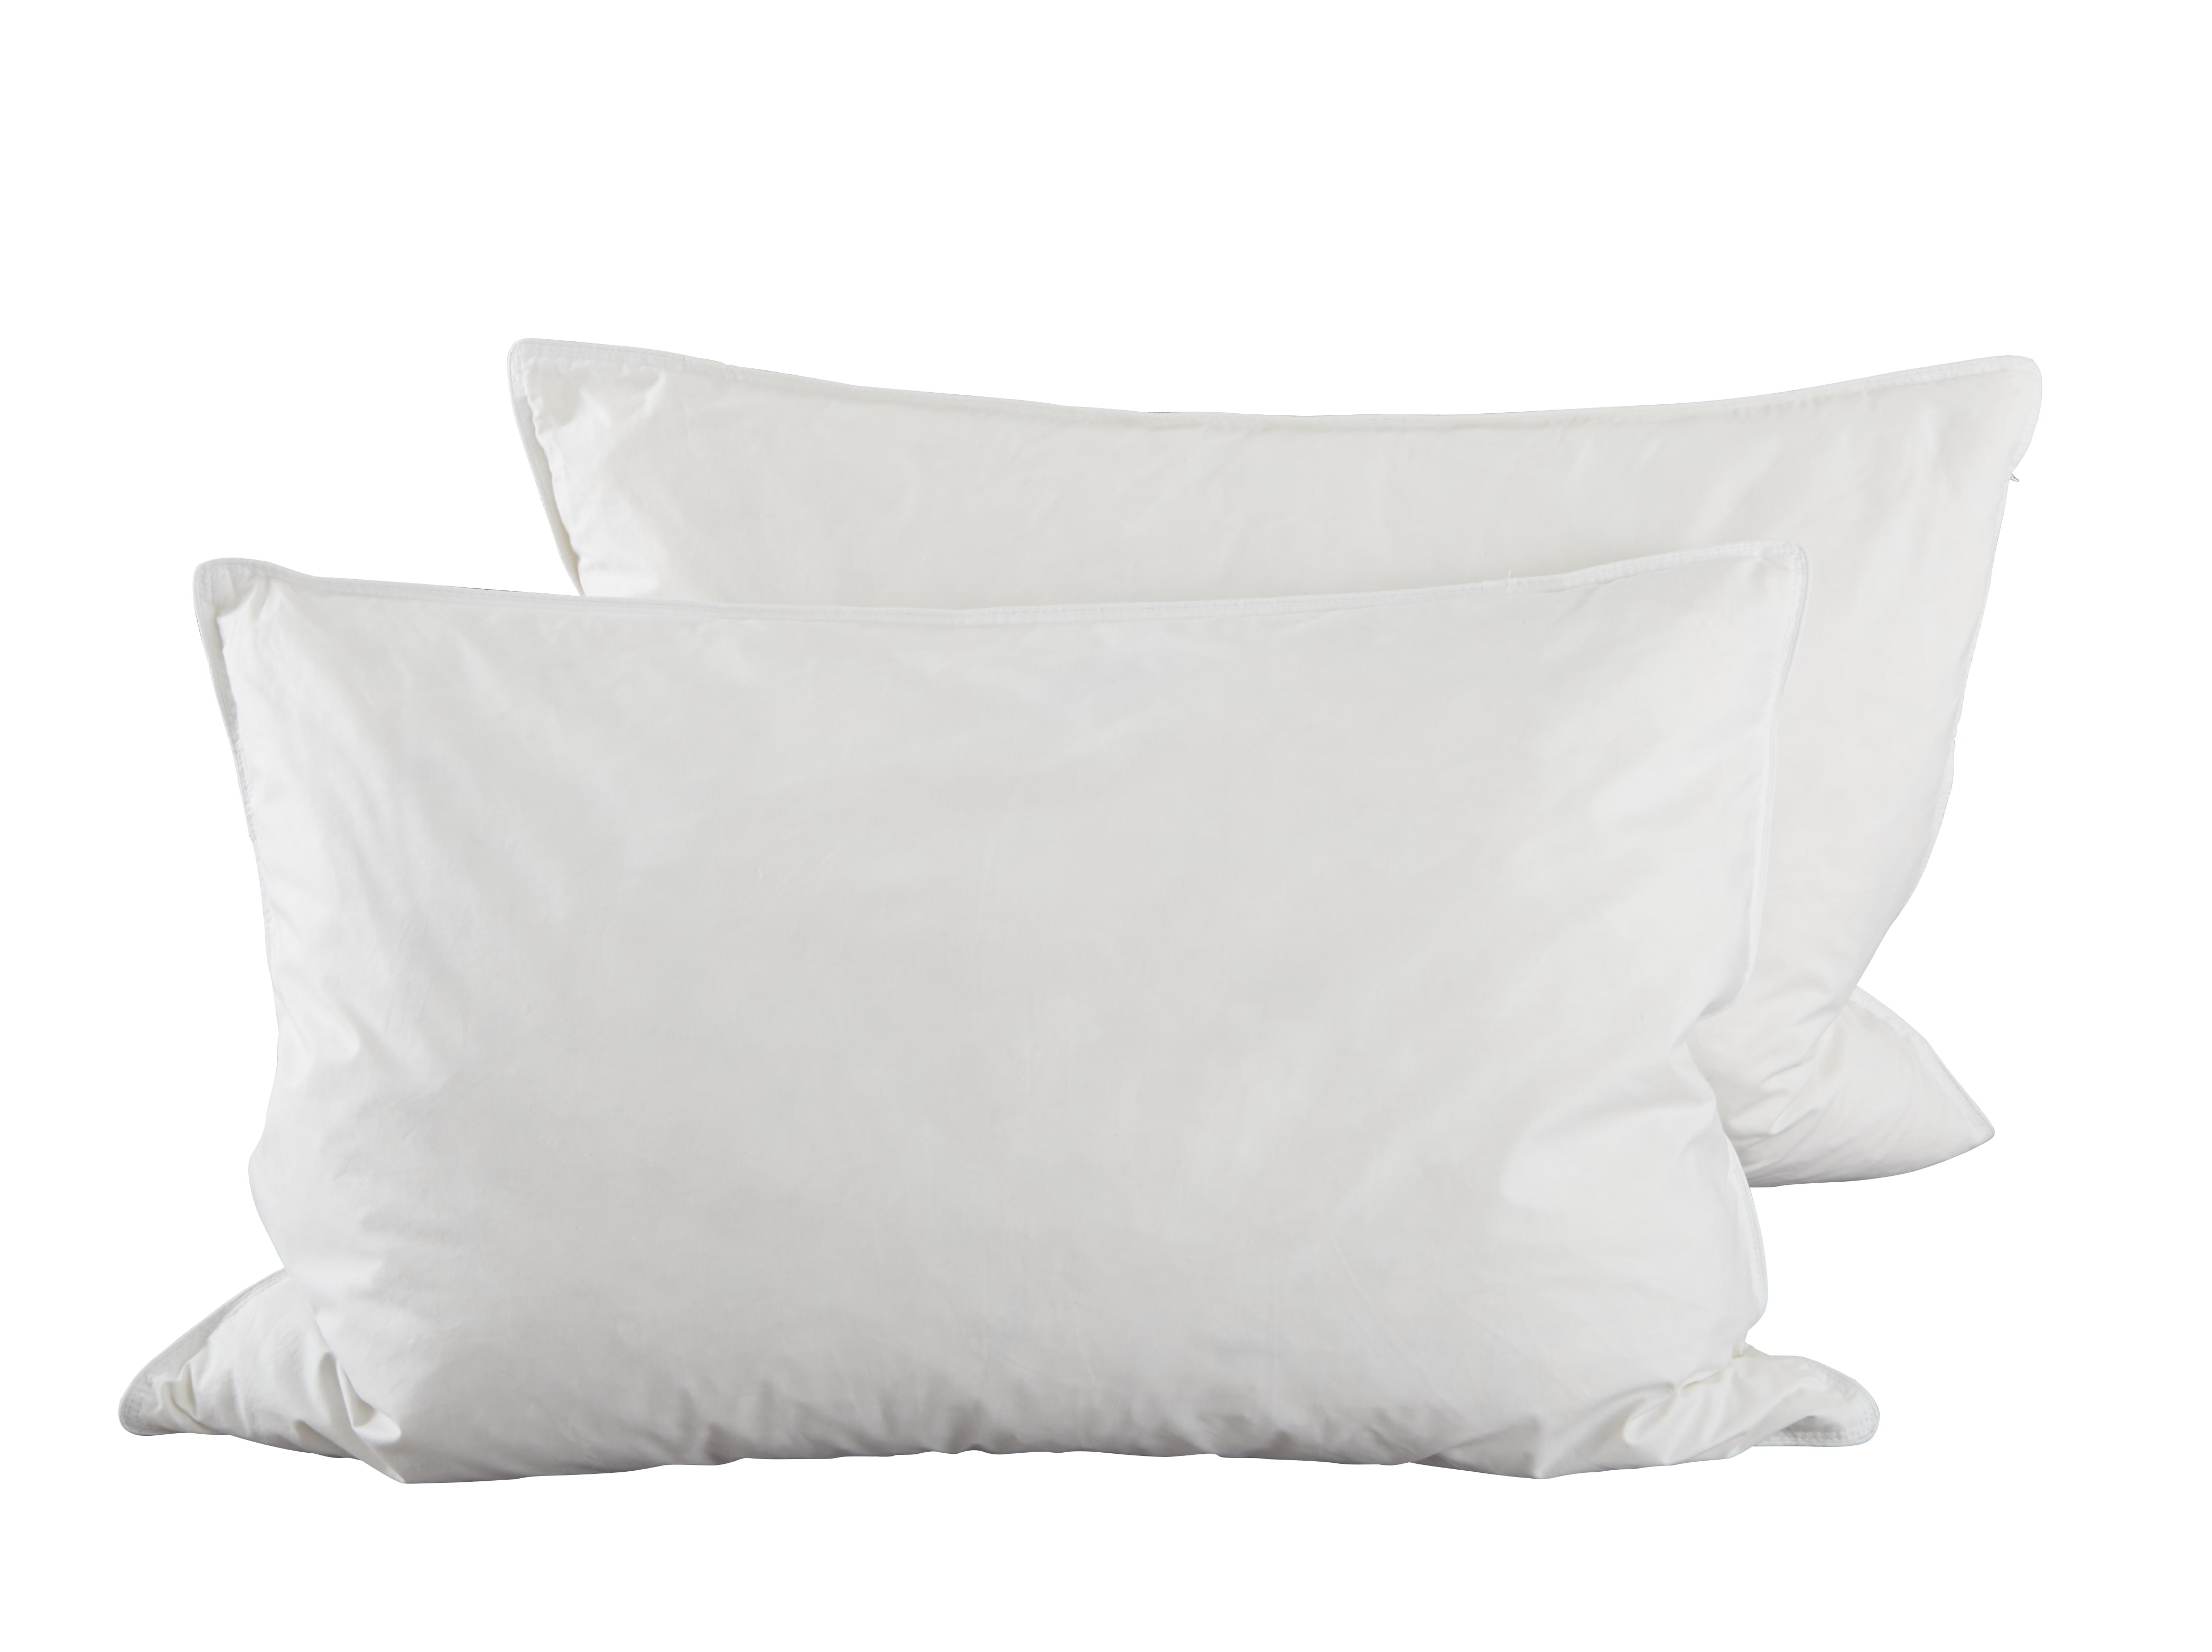 Box of 6 Duck Feather & Down Pillow Pair - Indulgence Range